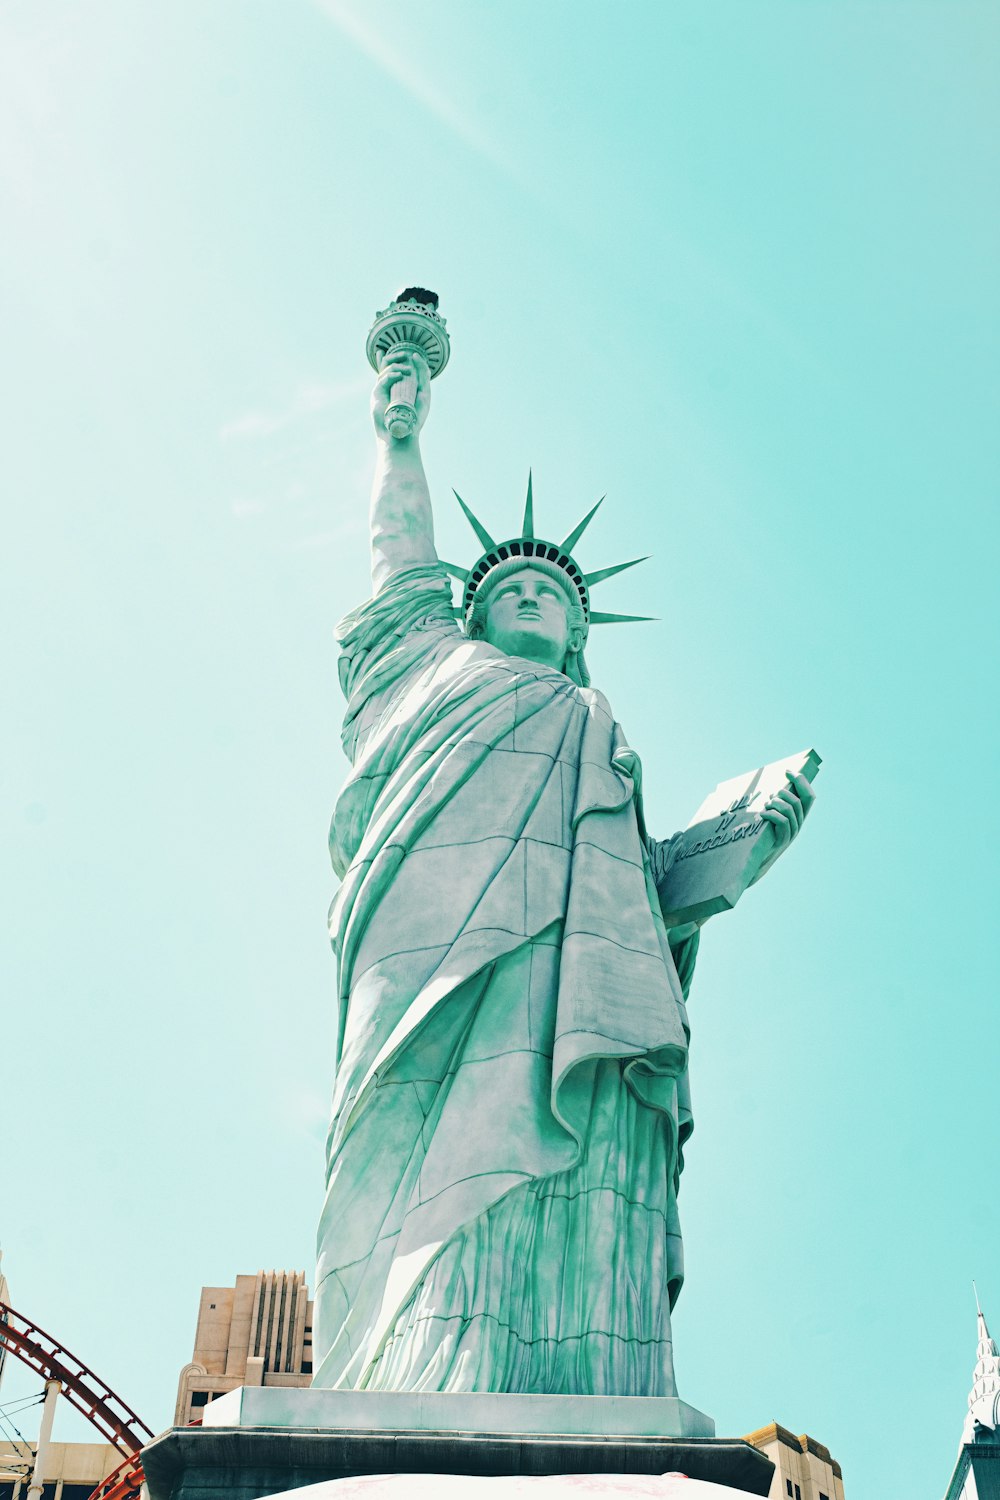 a statue of a person holding a torch with Statue of Liberty in the background